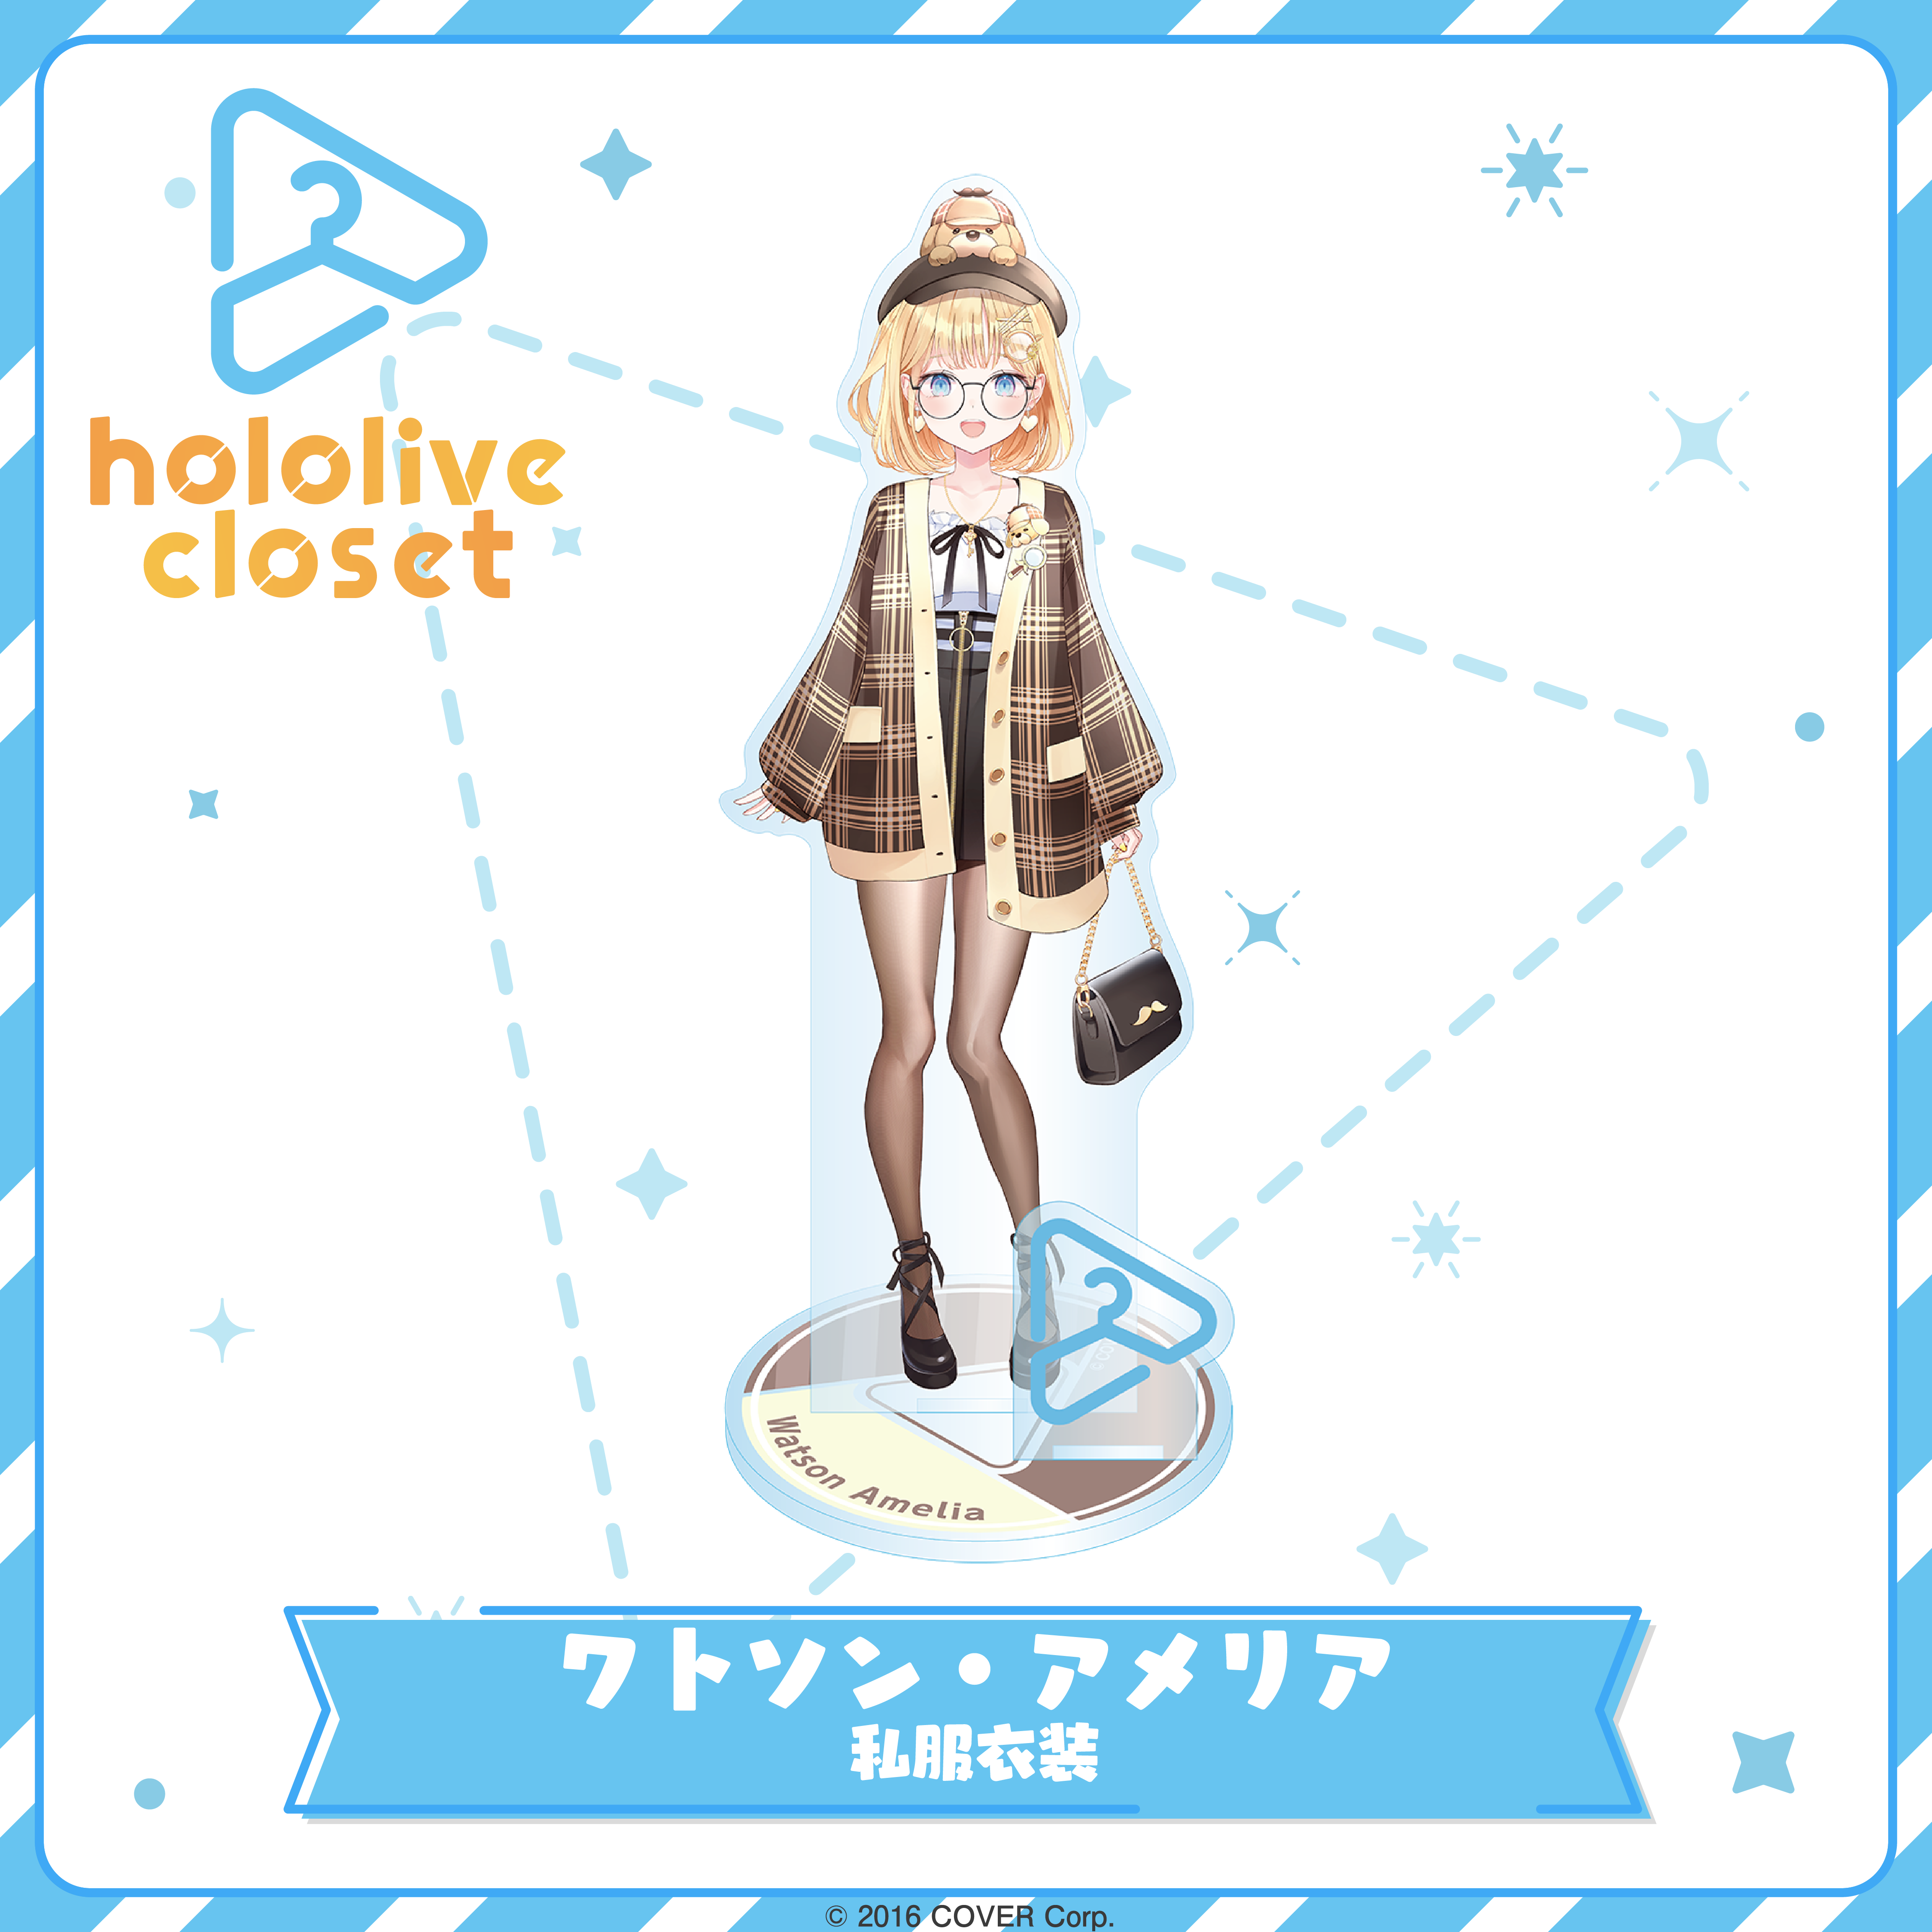 hololive closet ワトソン・アメリア 私服衣装